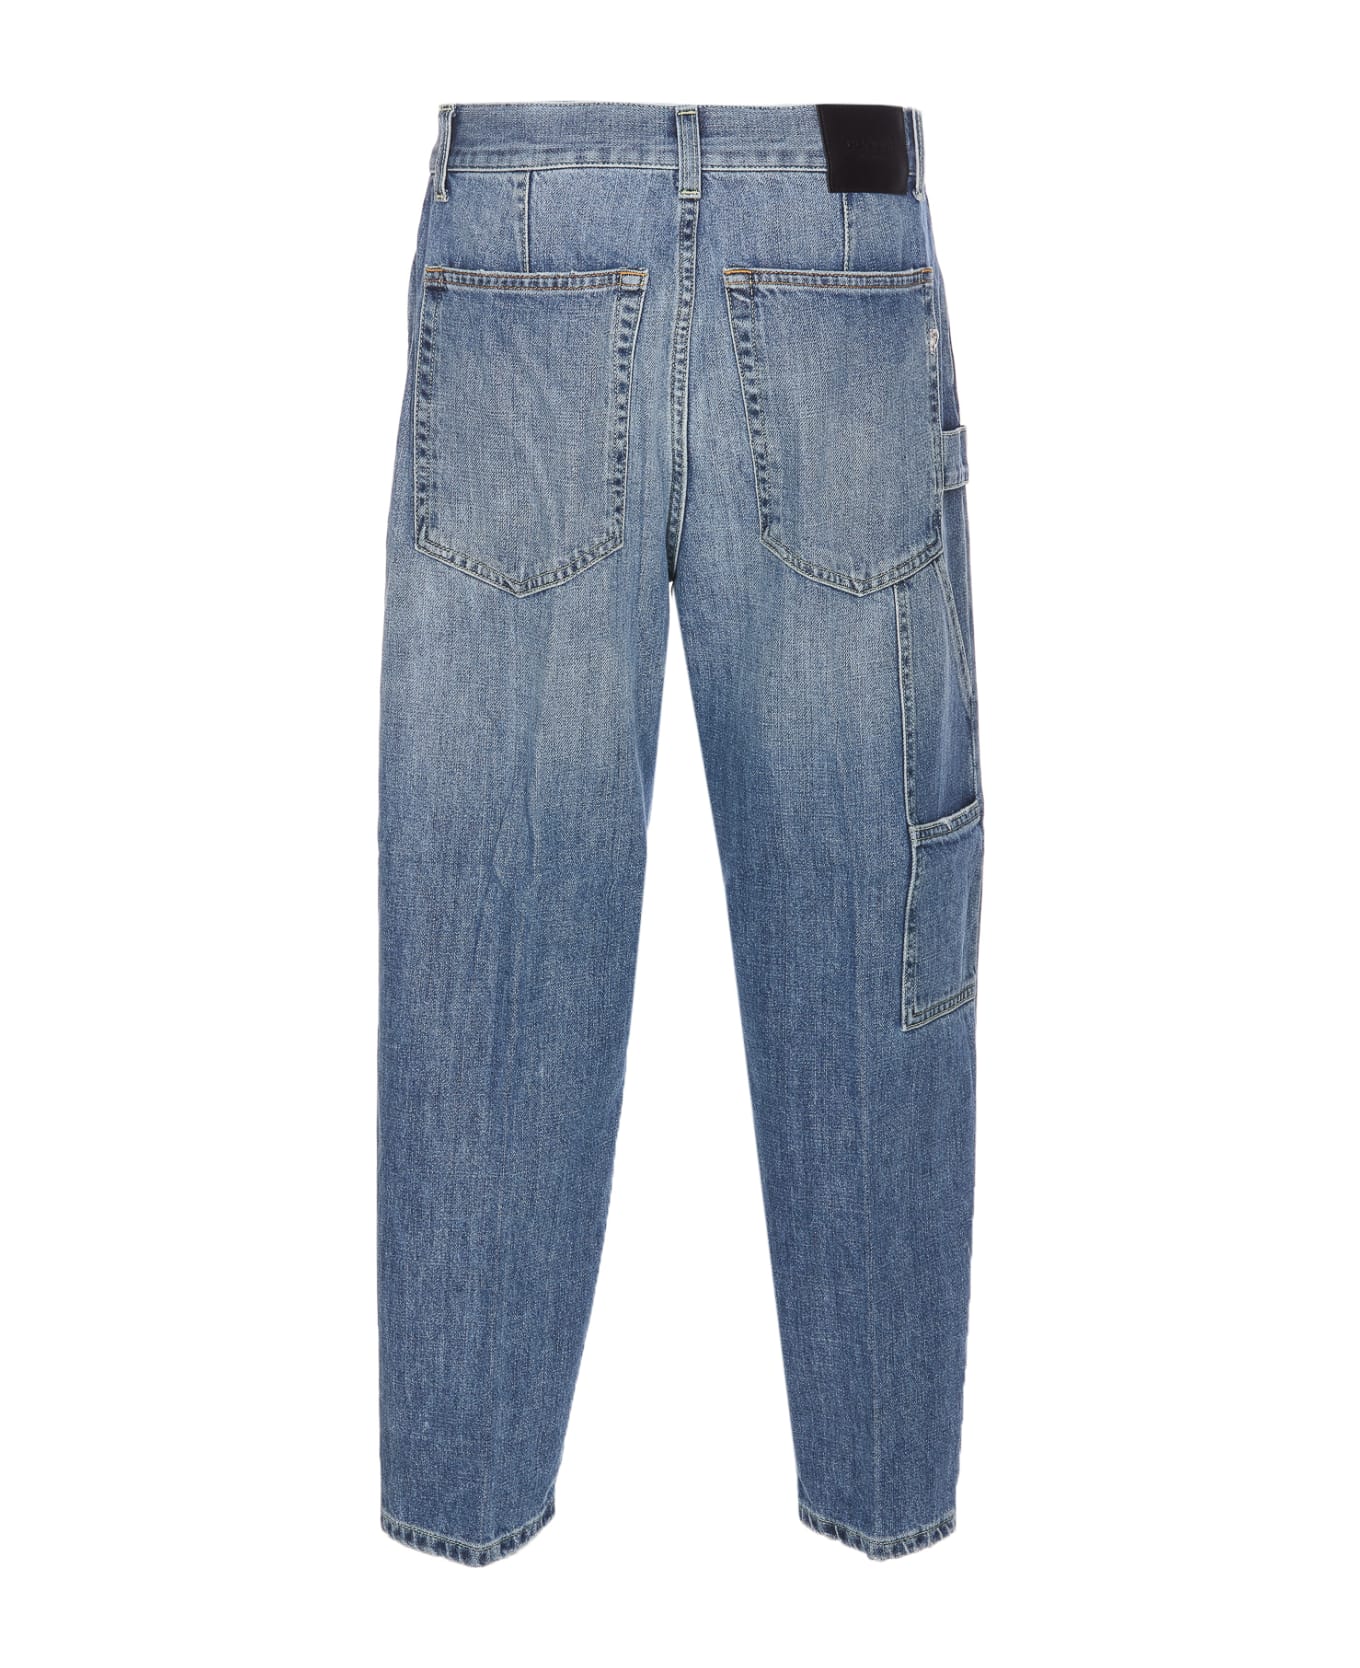 Dondup Carrie Denim Jeans - Blue ボトムス